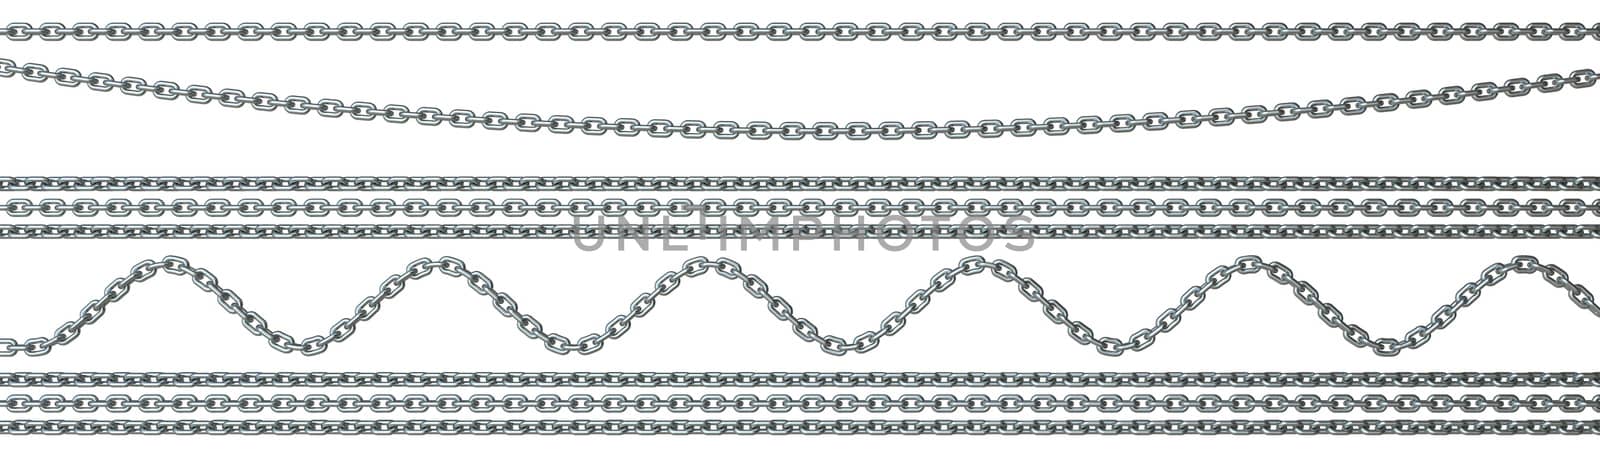 Chains decoration 3D render illustration isolated on white background